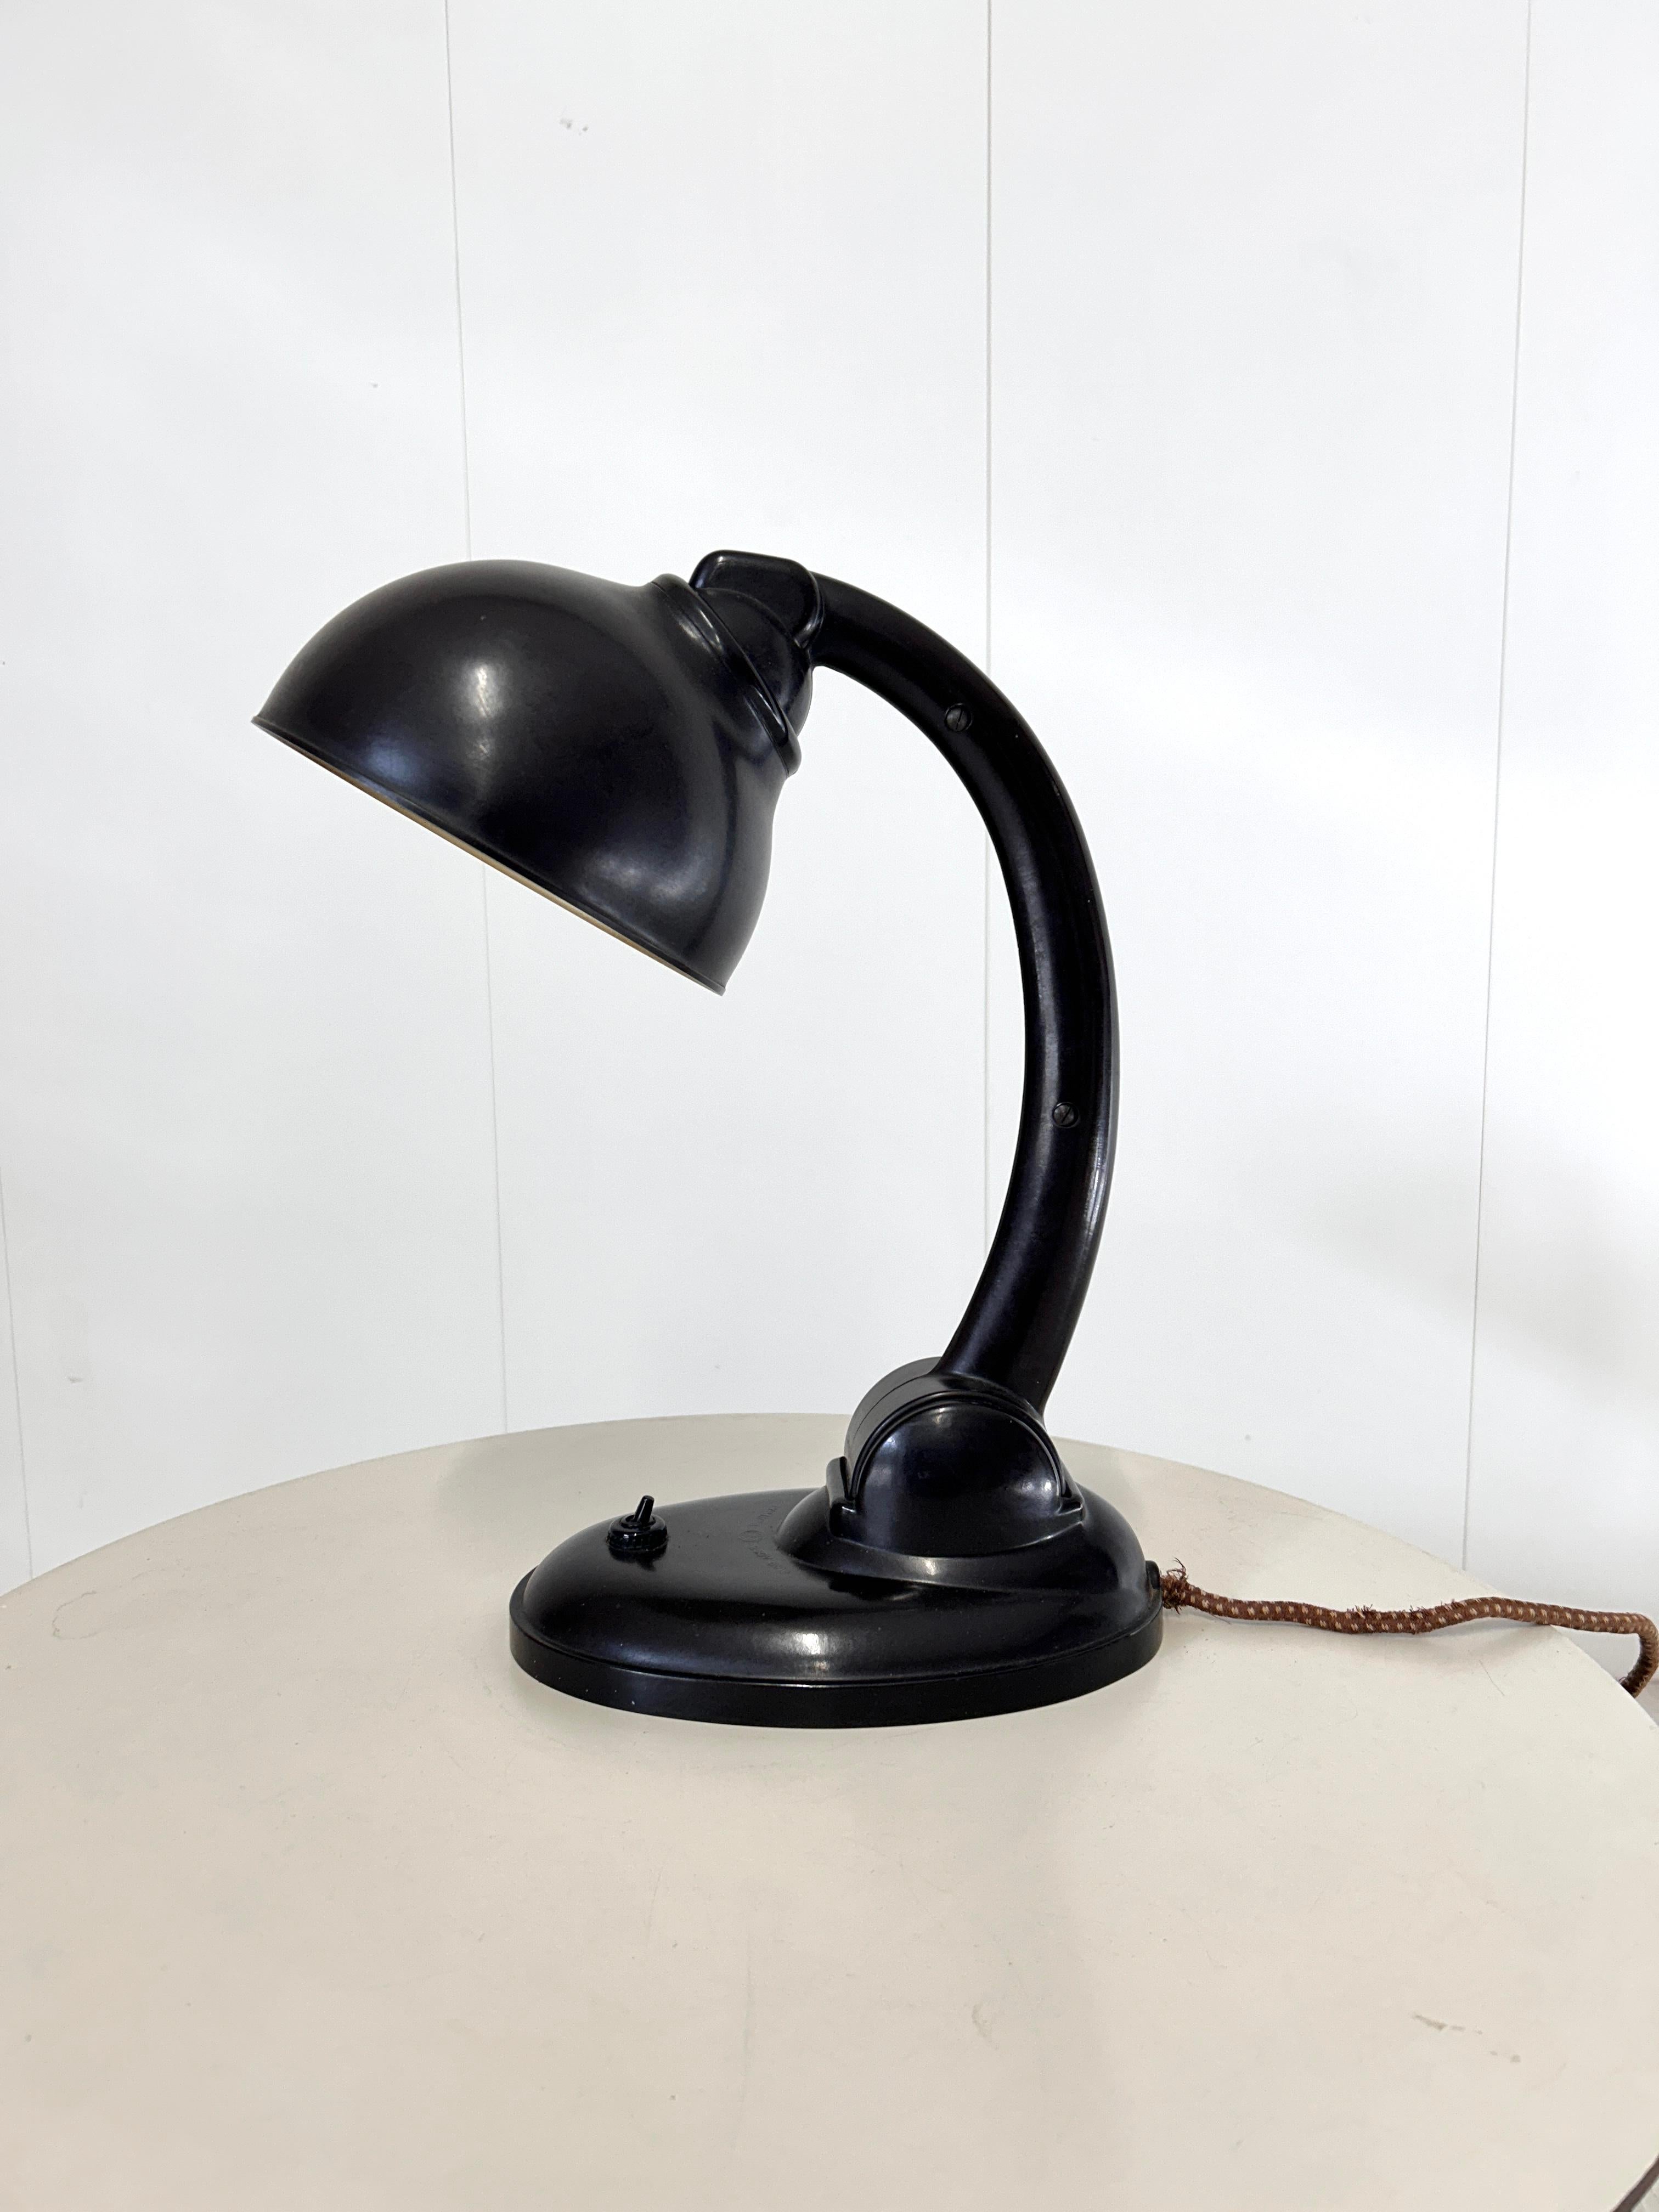 Bakelite Table lamp no. 11126 by Eric Kirkham Cole, 1930s For Sale